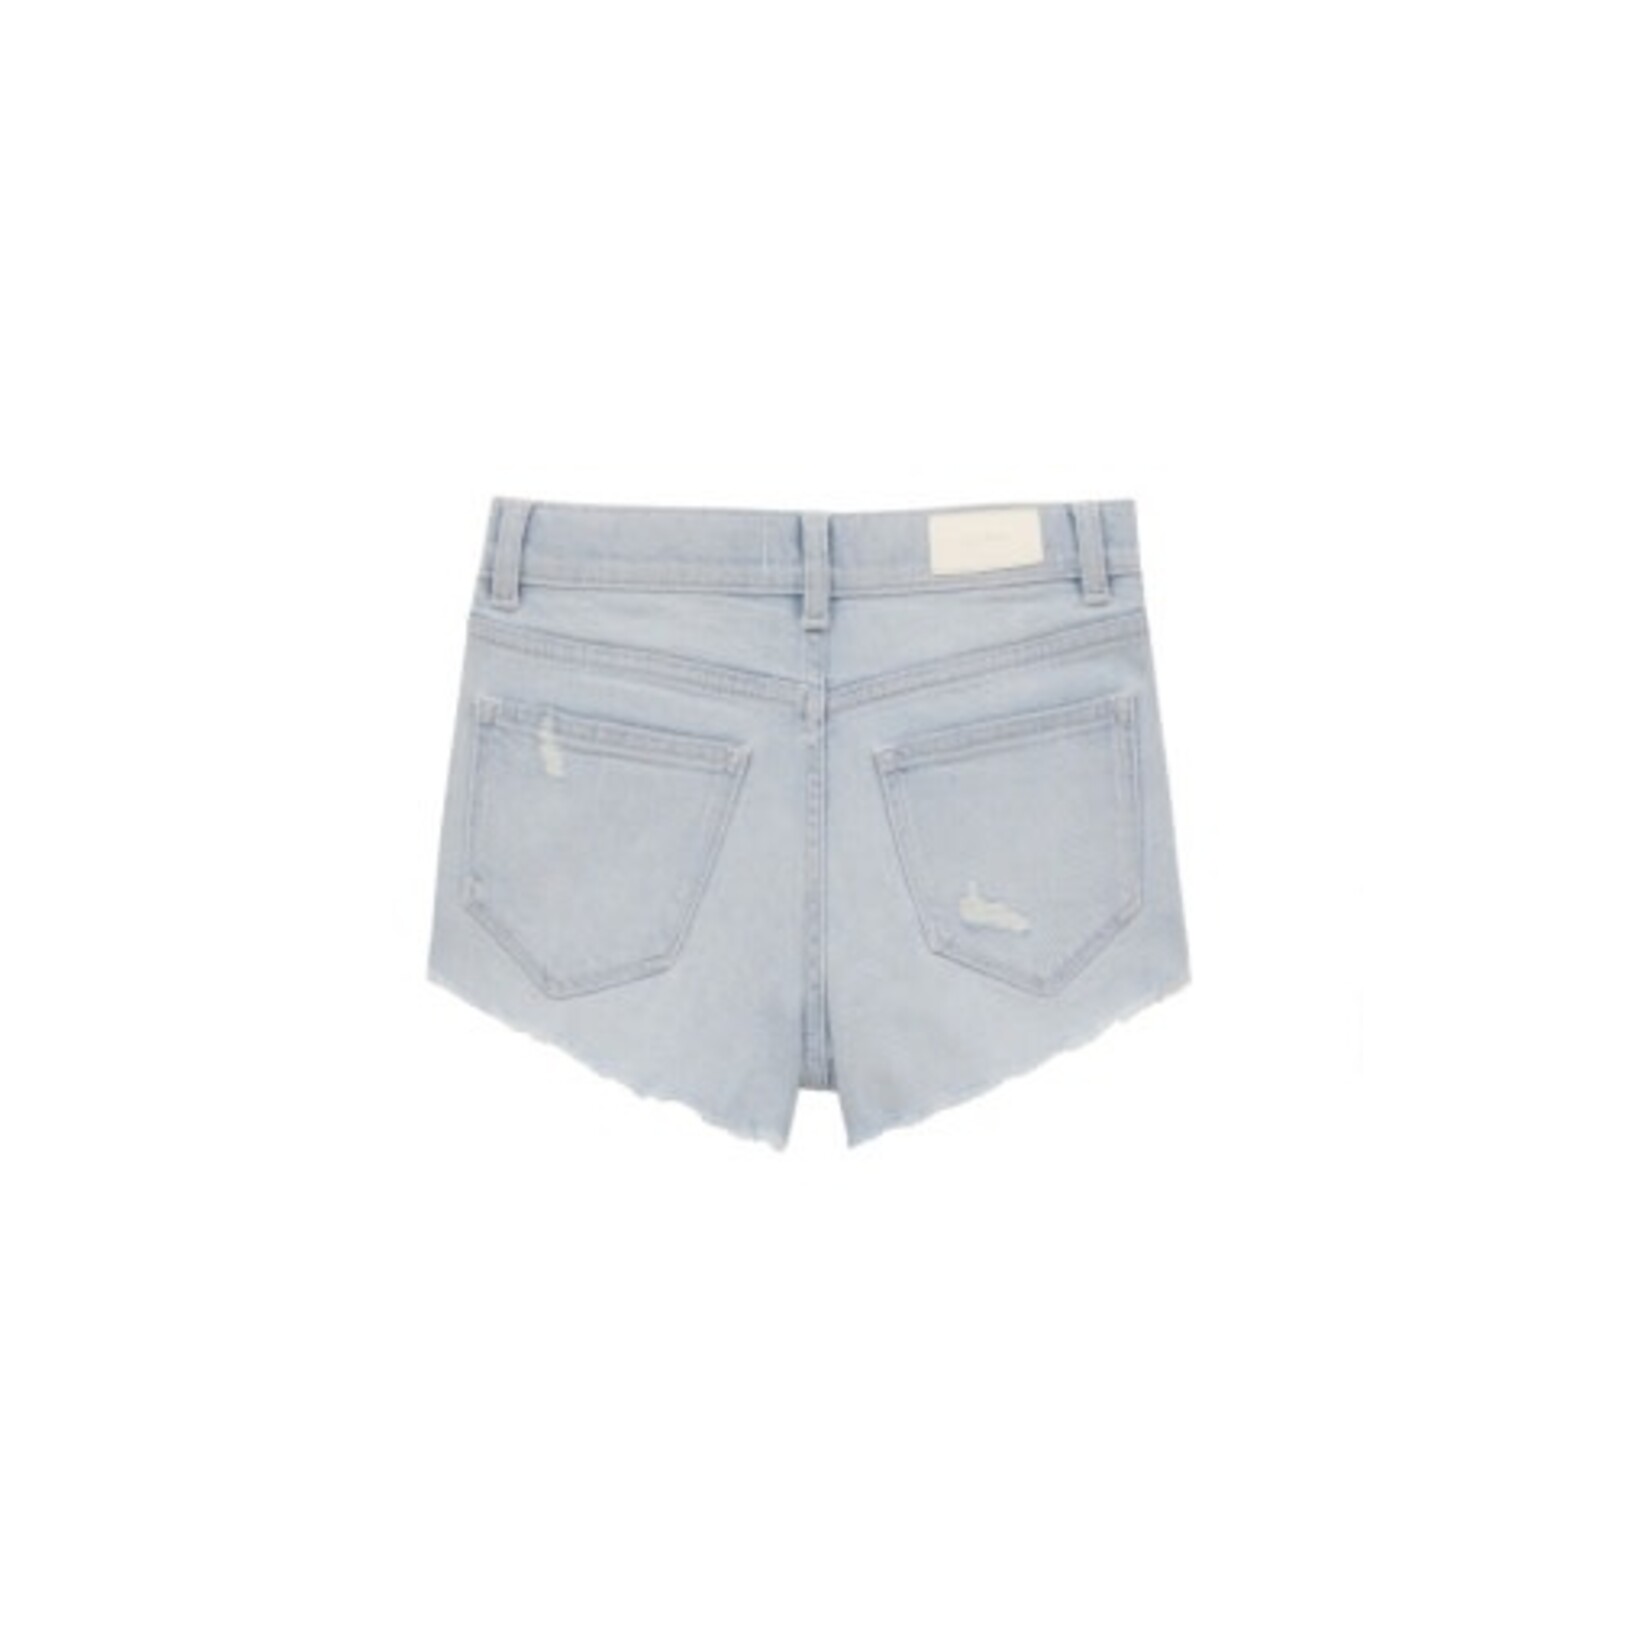 DL1961 lucy high rise shorts: cut off